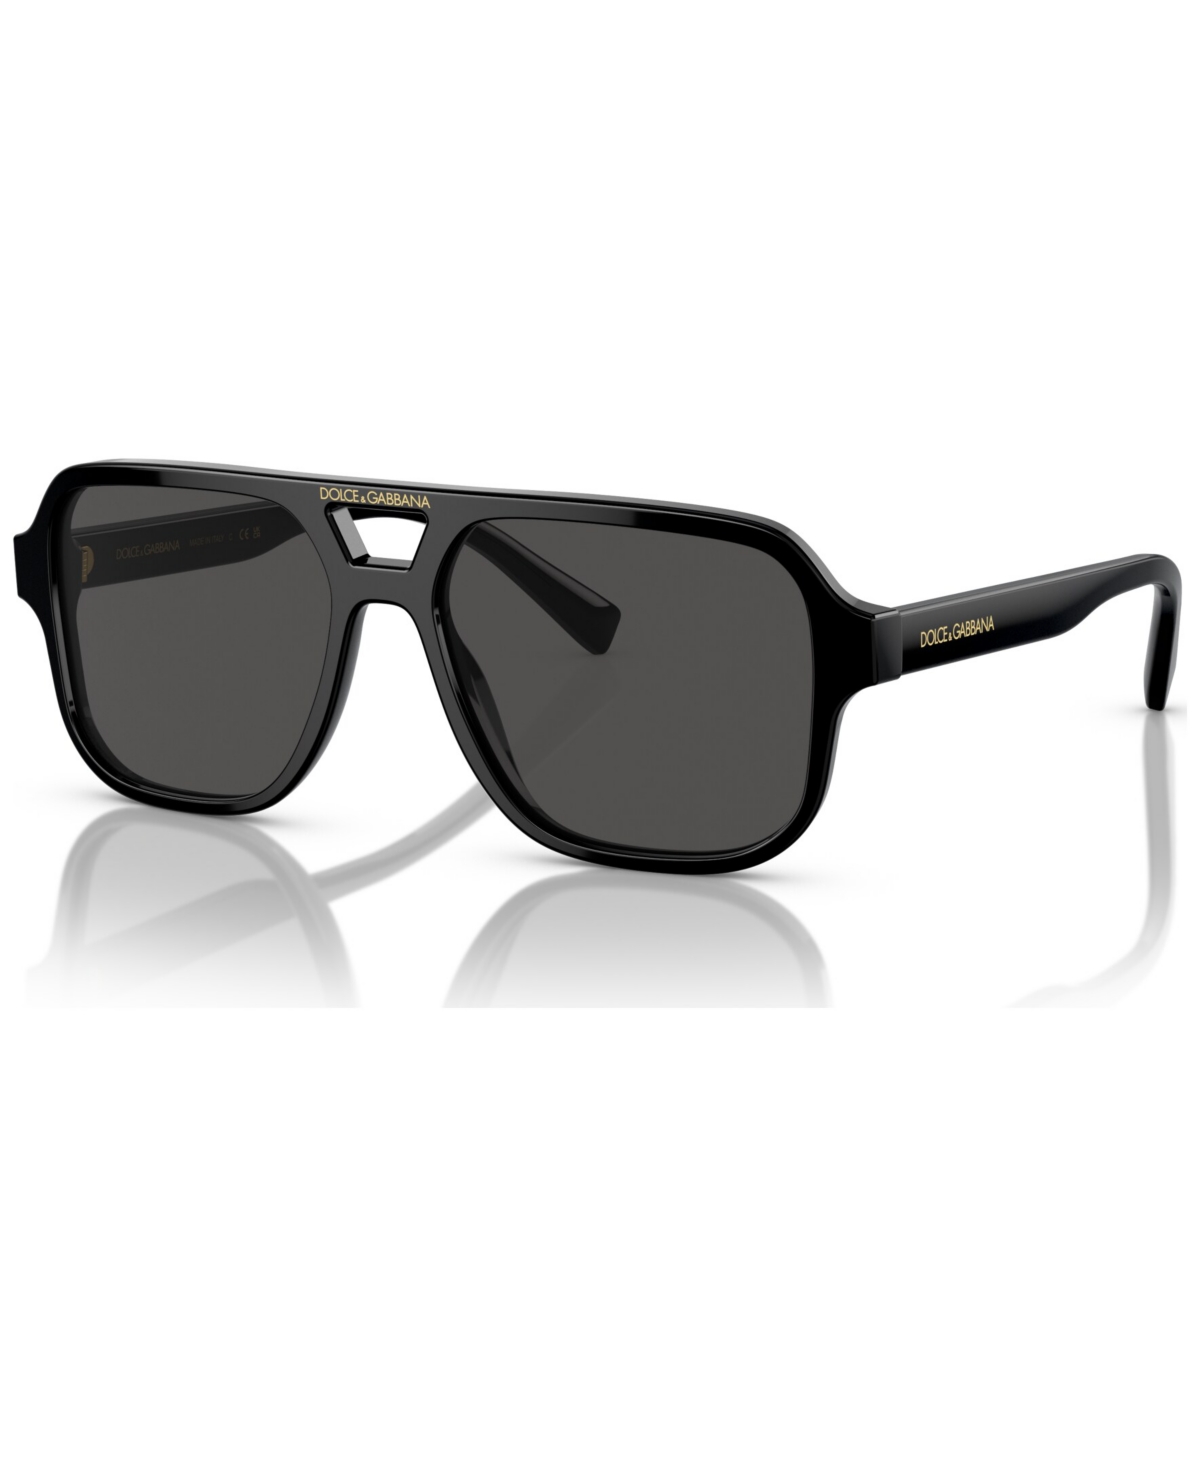 Dolce & Gabbana Kids Sunglasses, 0dx4003 (ages 7-10) In Black